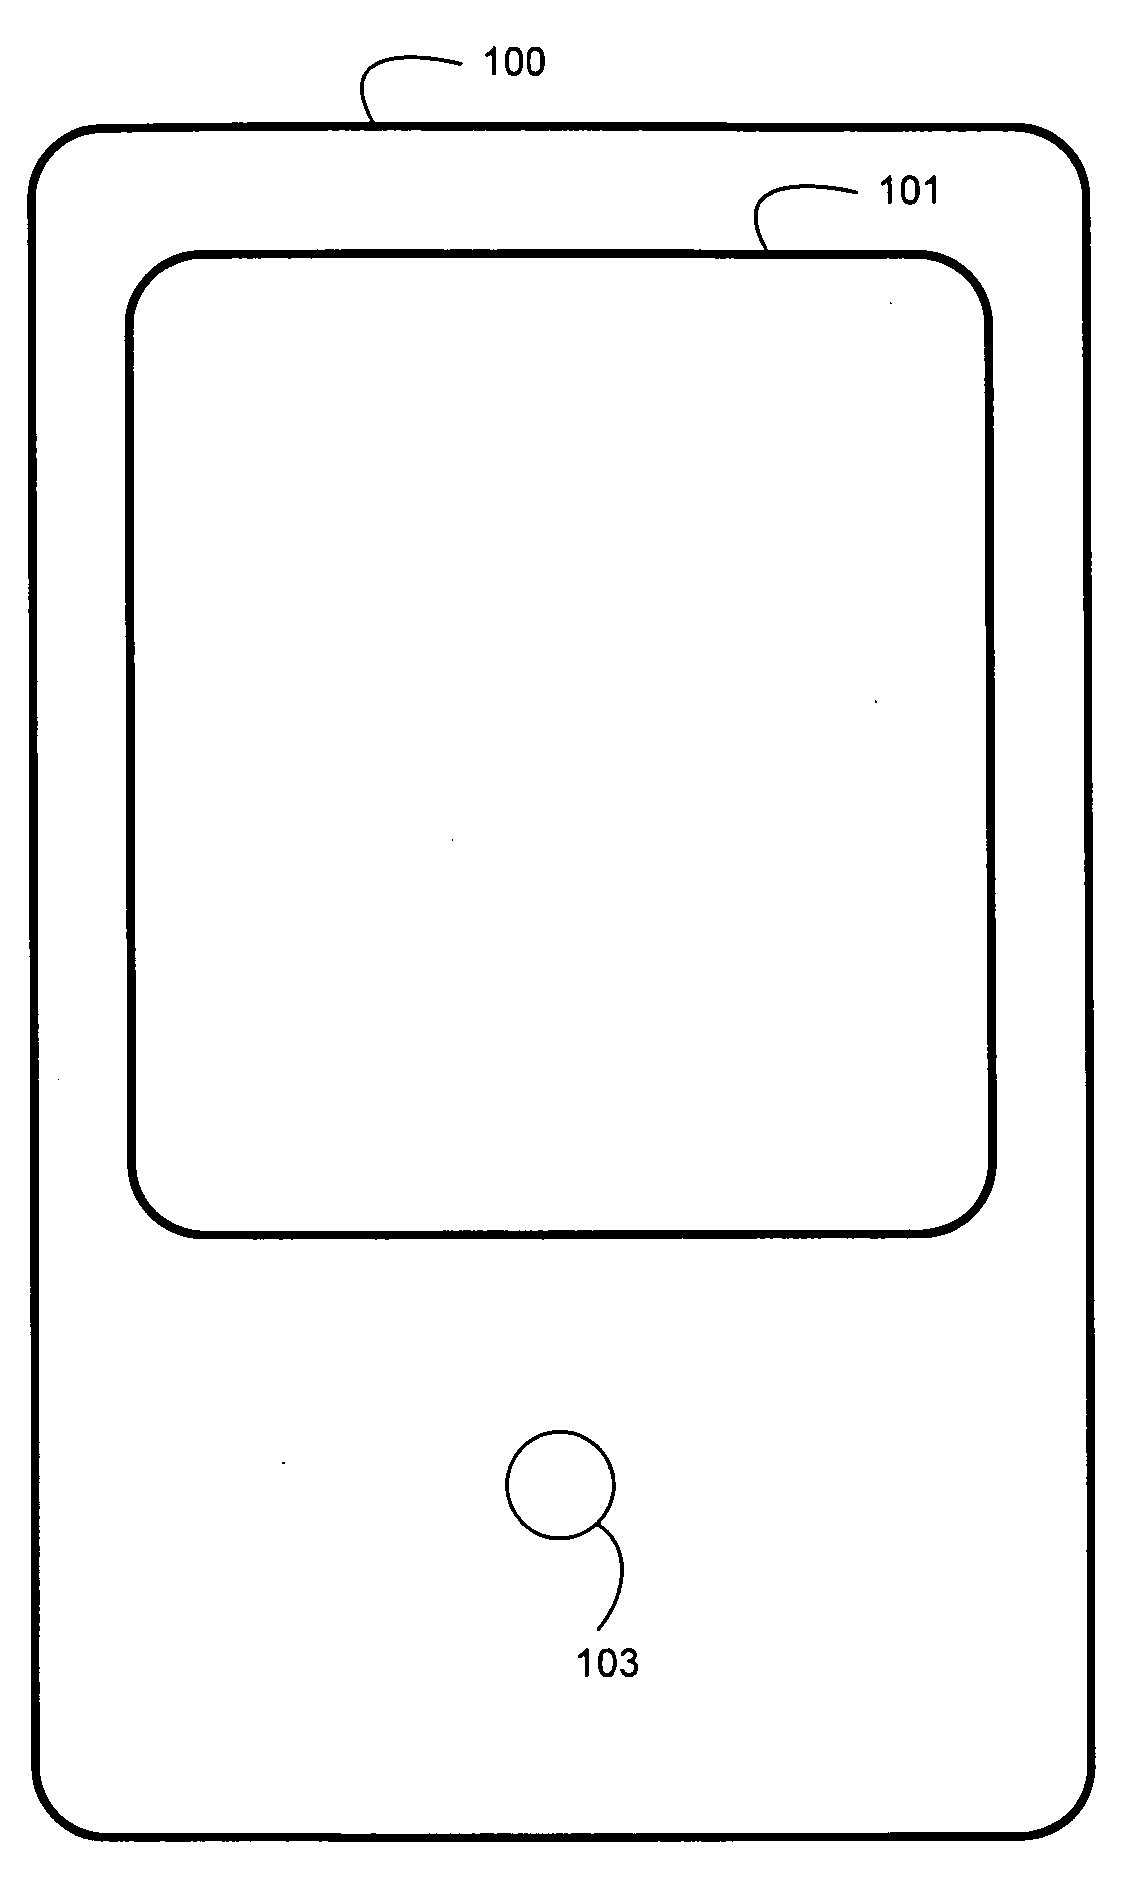 Touch-Sensitive Display Screen With Absolute And Relative Input Modes